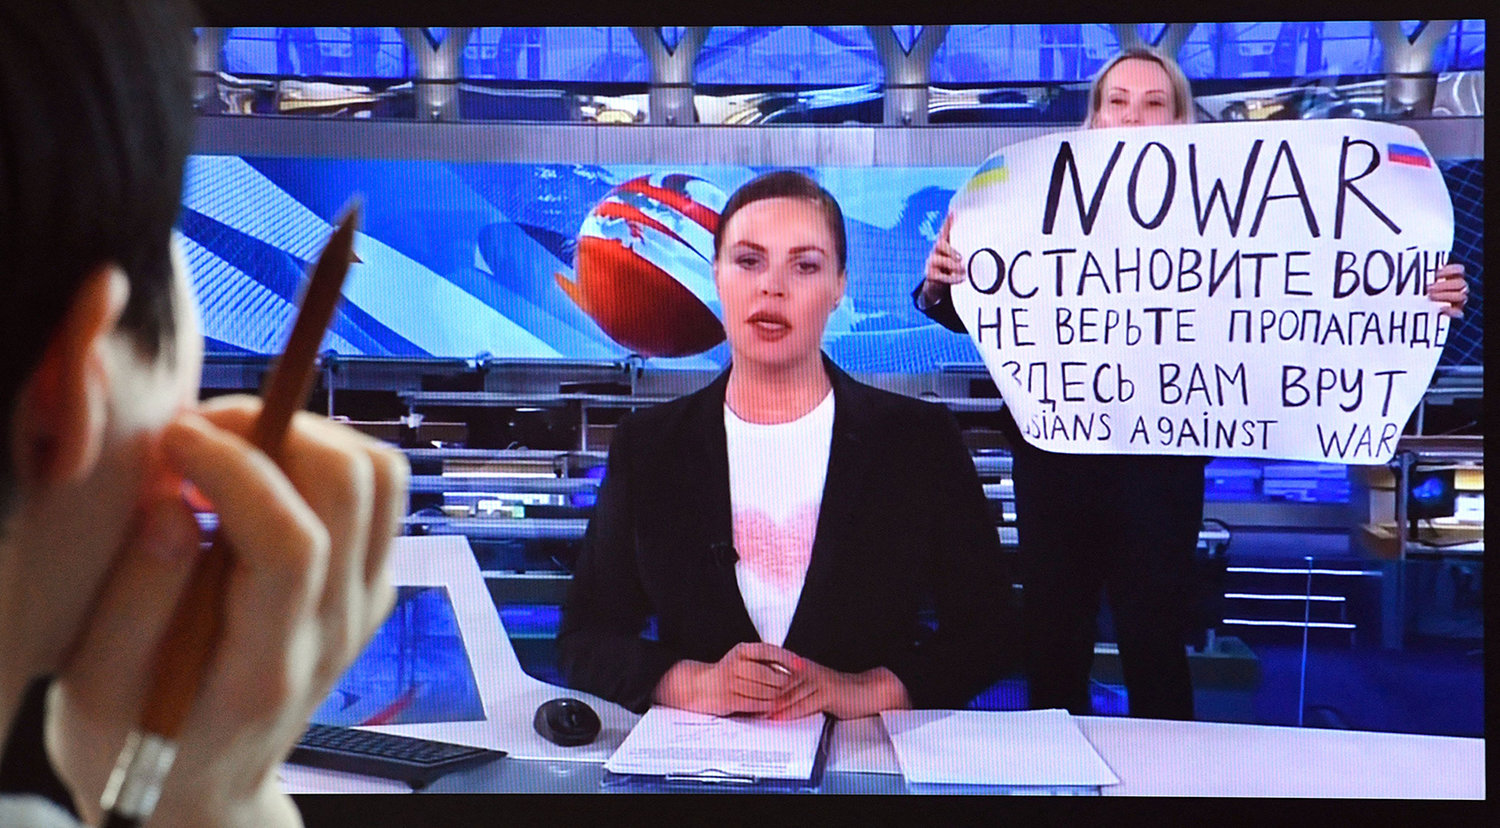 As news anchor Yekaterina Andreyeva, center, discusses Russia's relations with Belarus, Marina Ovsyannikova, right, burst into view, holding up a handwritten poster saying "No war" in English. (AFP via Getty Images/TNS)